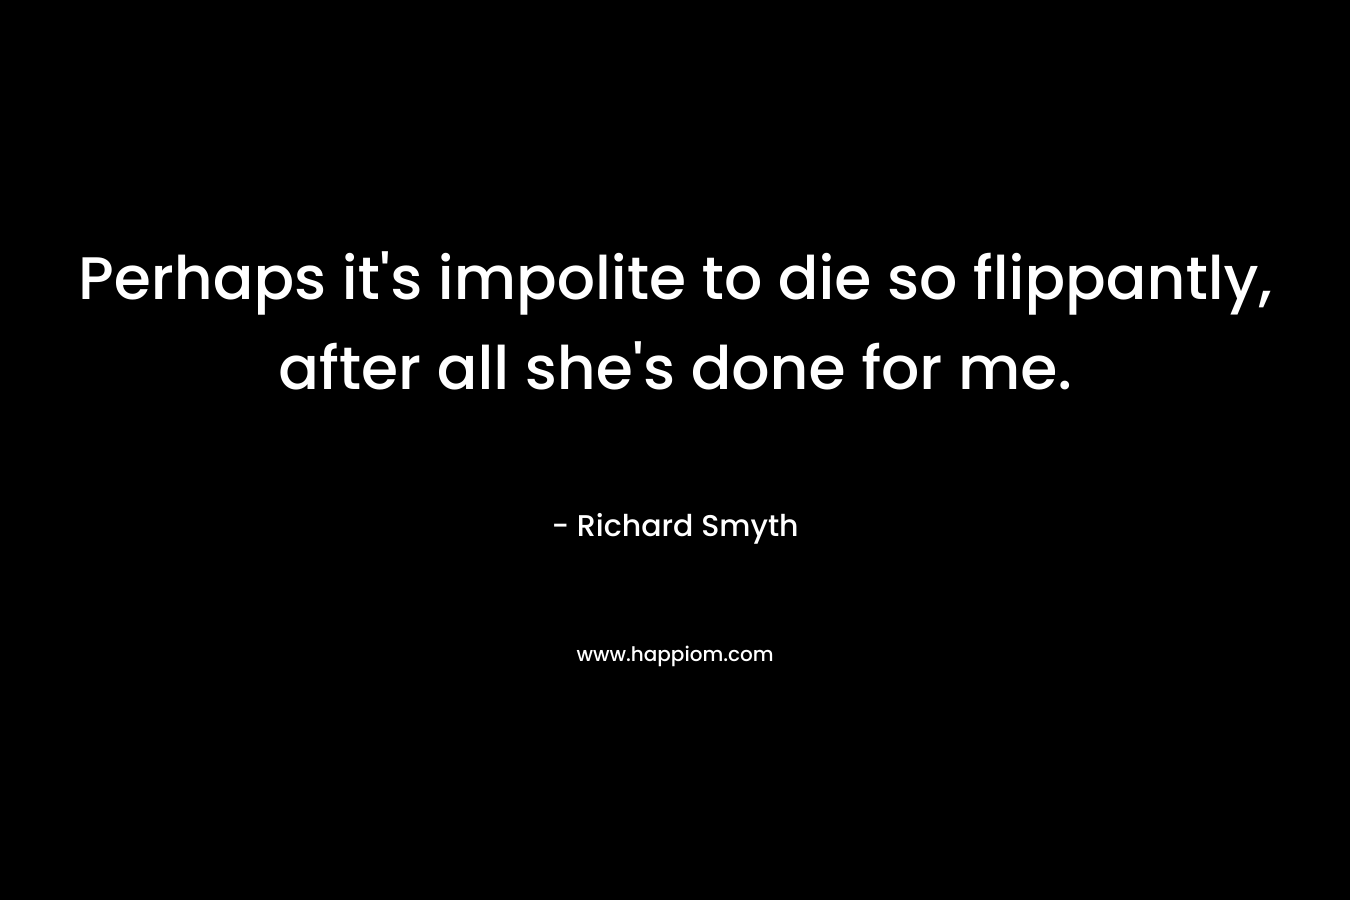 Perhaps it’s impolite to die so flippantly, after all she’s done for me. – Richard Smyth